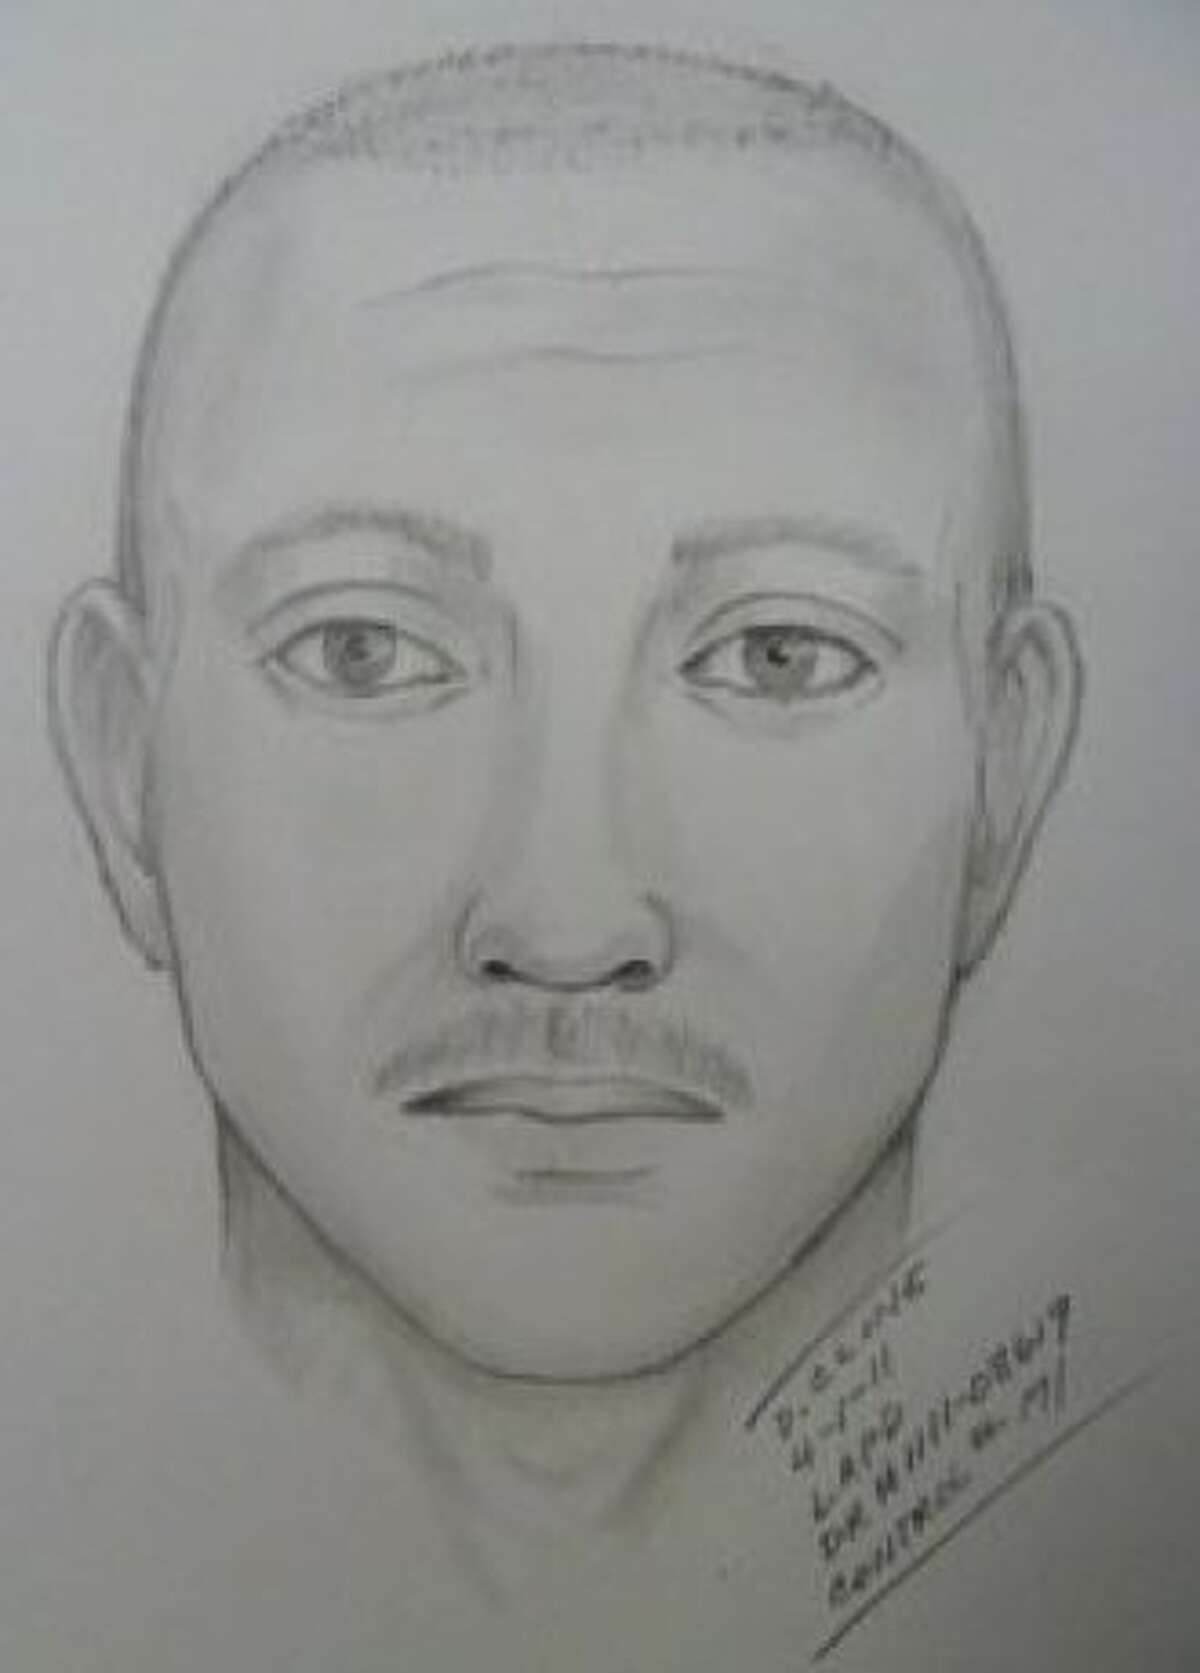 This artist sketch provided by the Los Angeles Police Department shows one of two suspects wanted in the attack on the Giants fan at Dodger Stadium that took place during the longtime rival team's game Thursday March 31, 2011. The attack left the victim in critical but stable condition as authorities asked any possible witnesses Friday for help in identifying the assailants.